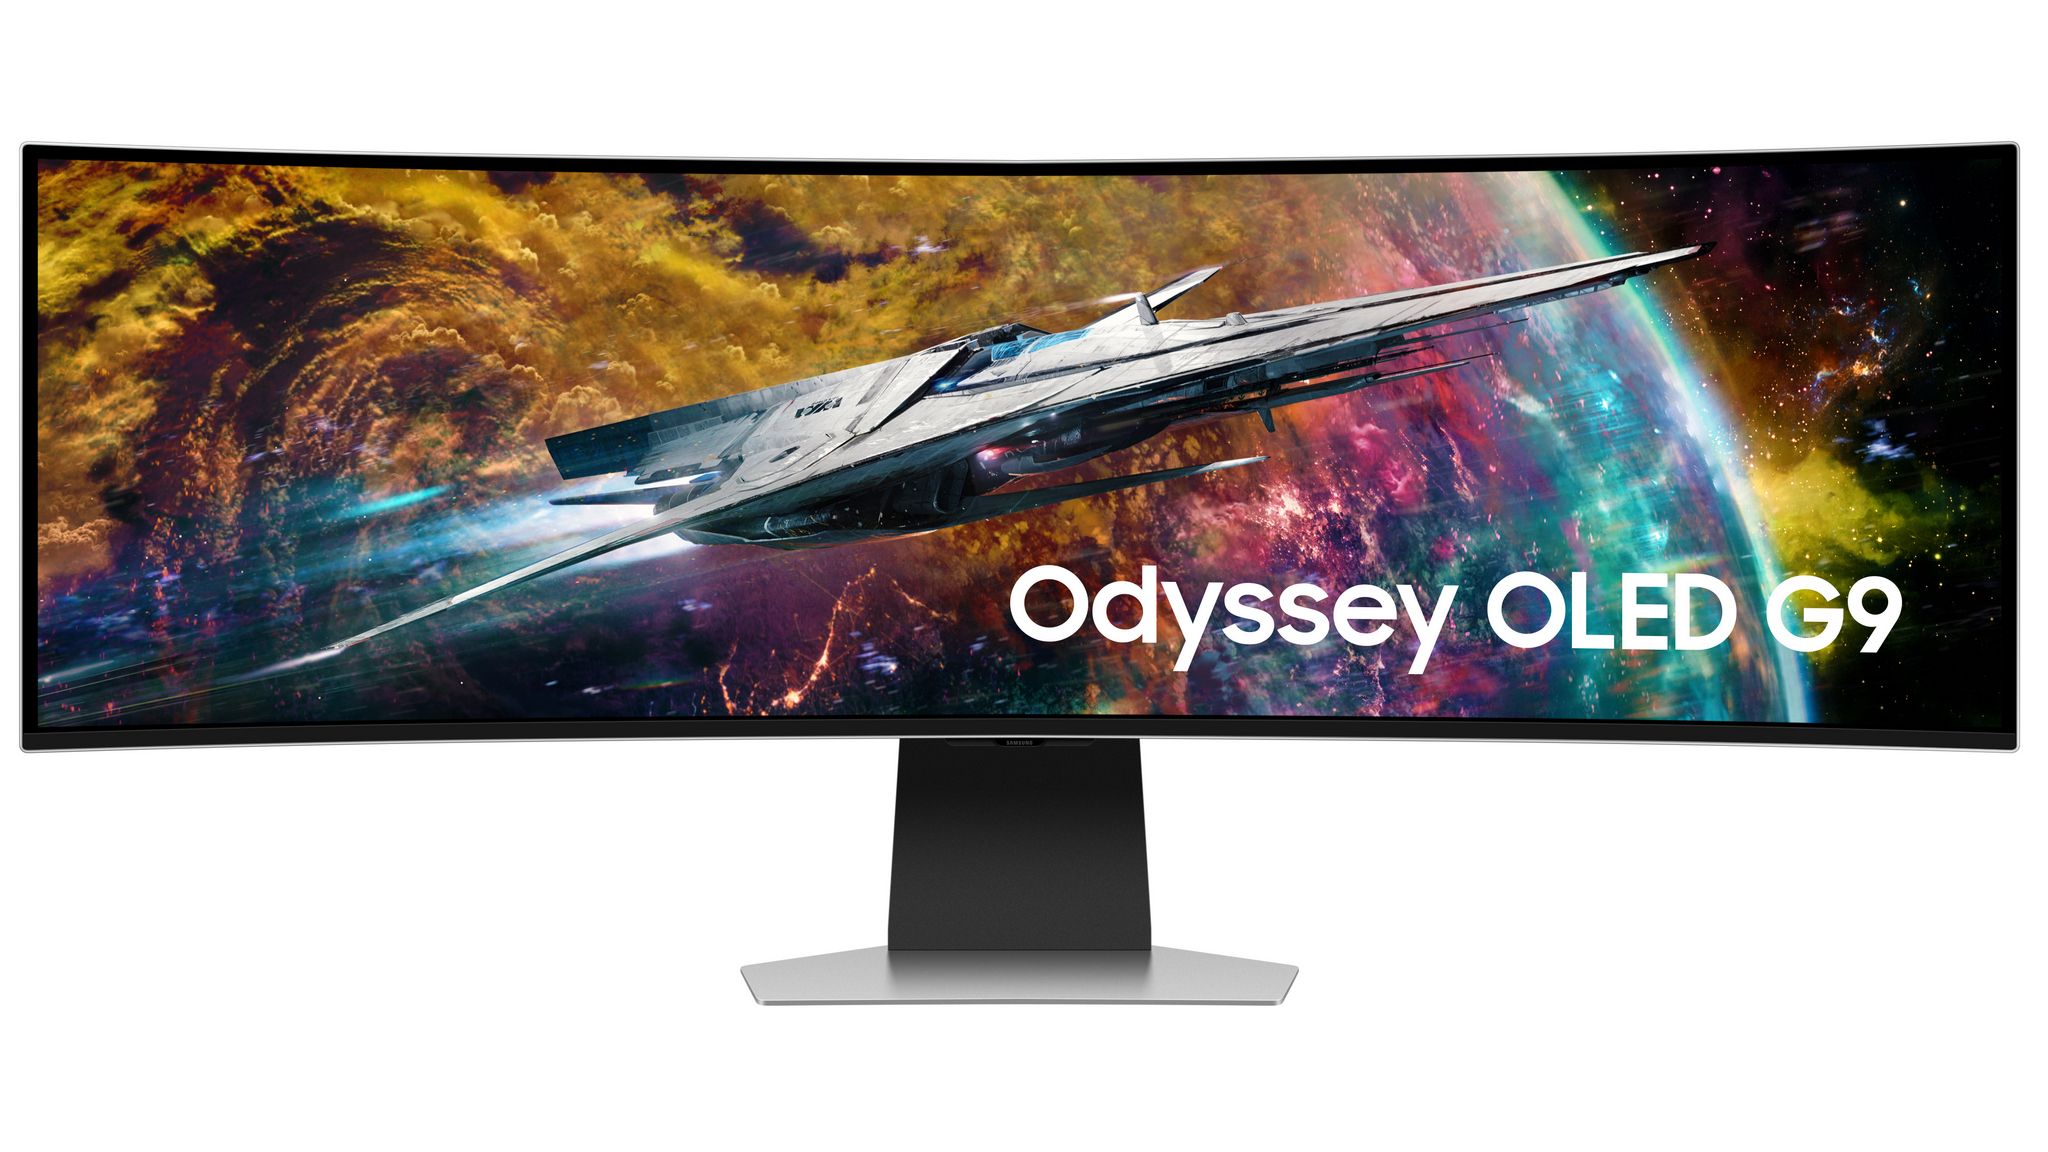 𝗦𝗔𝗠𝗦𝗨𝗡𝗚 Odyssey G4, the 27 gaming 𝐦𝐨𝐧𝐢𝐭𝐨𝐫 available